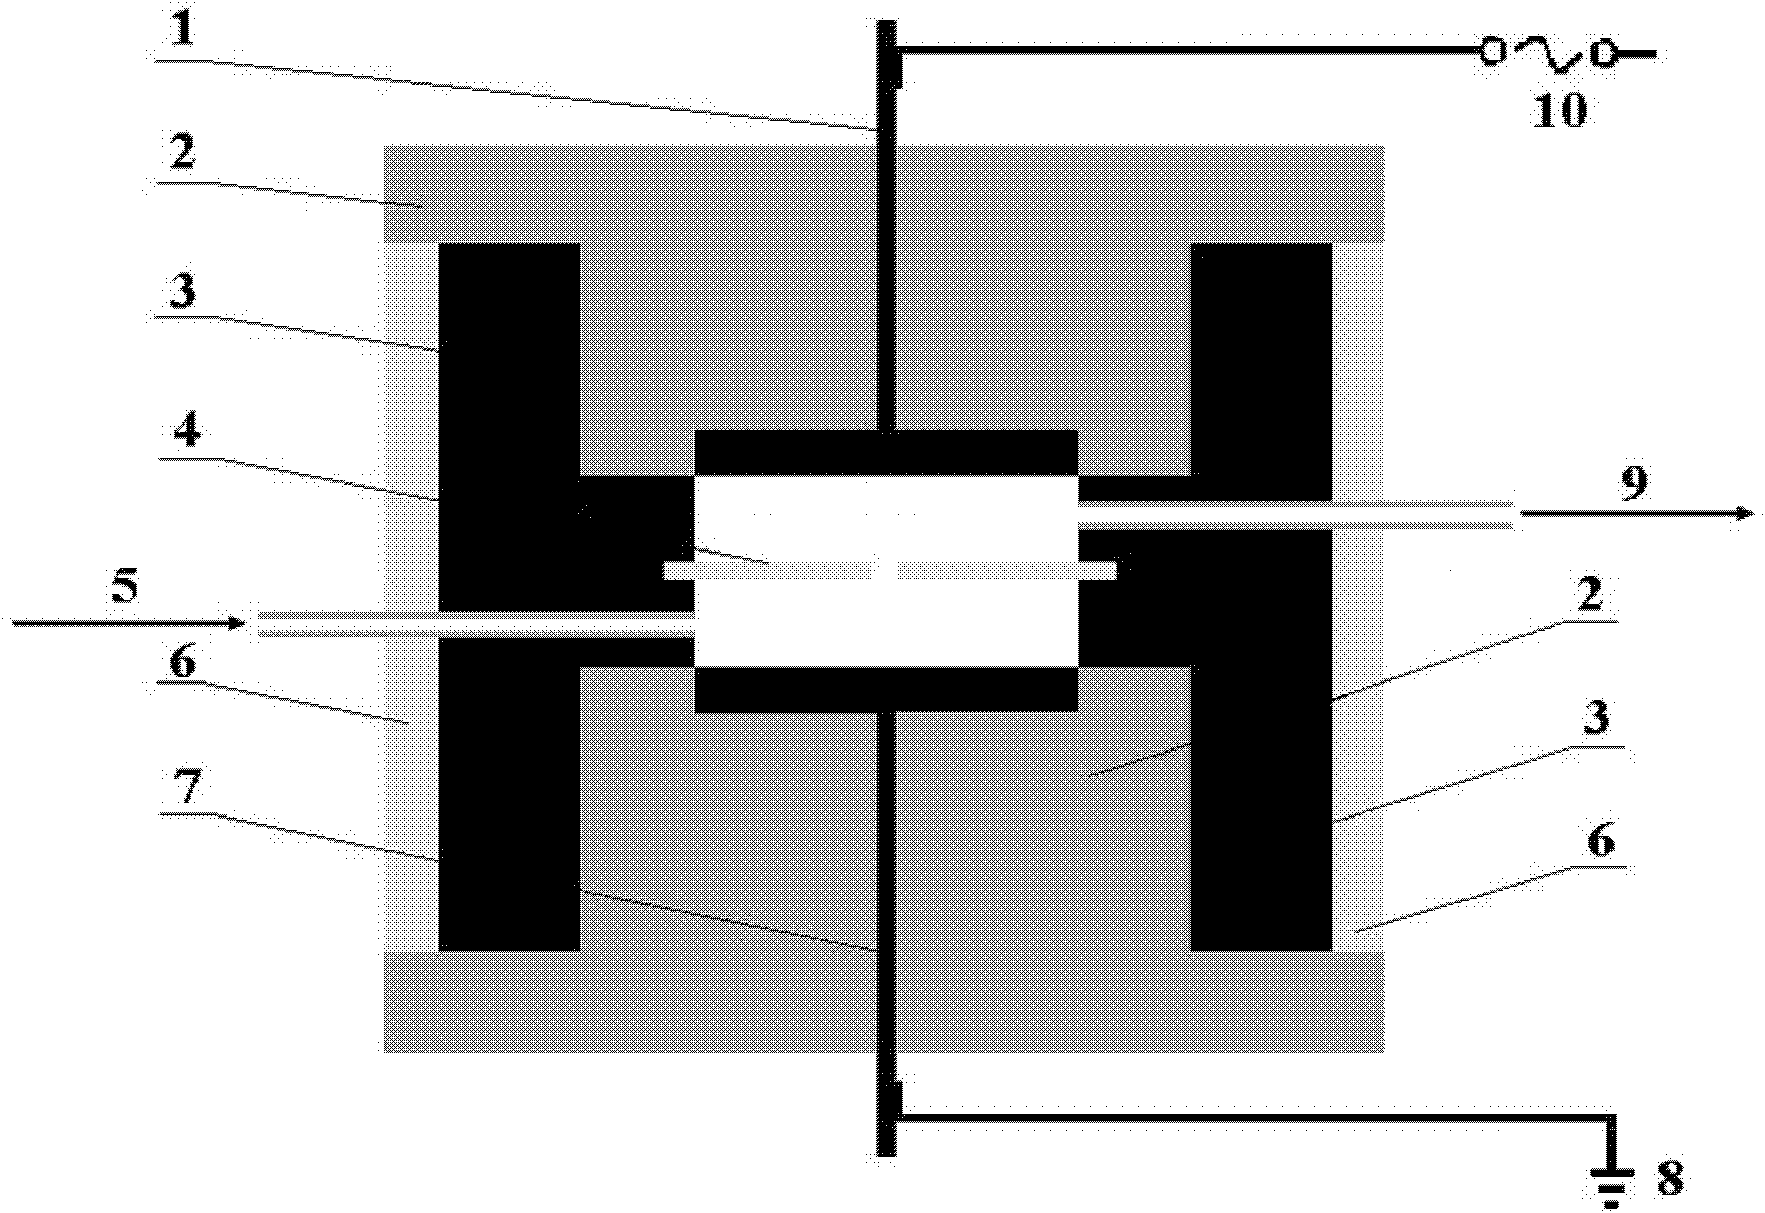 Plate type plasma reactor for hydrogen production through ammonia decomposition